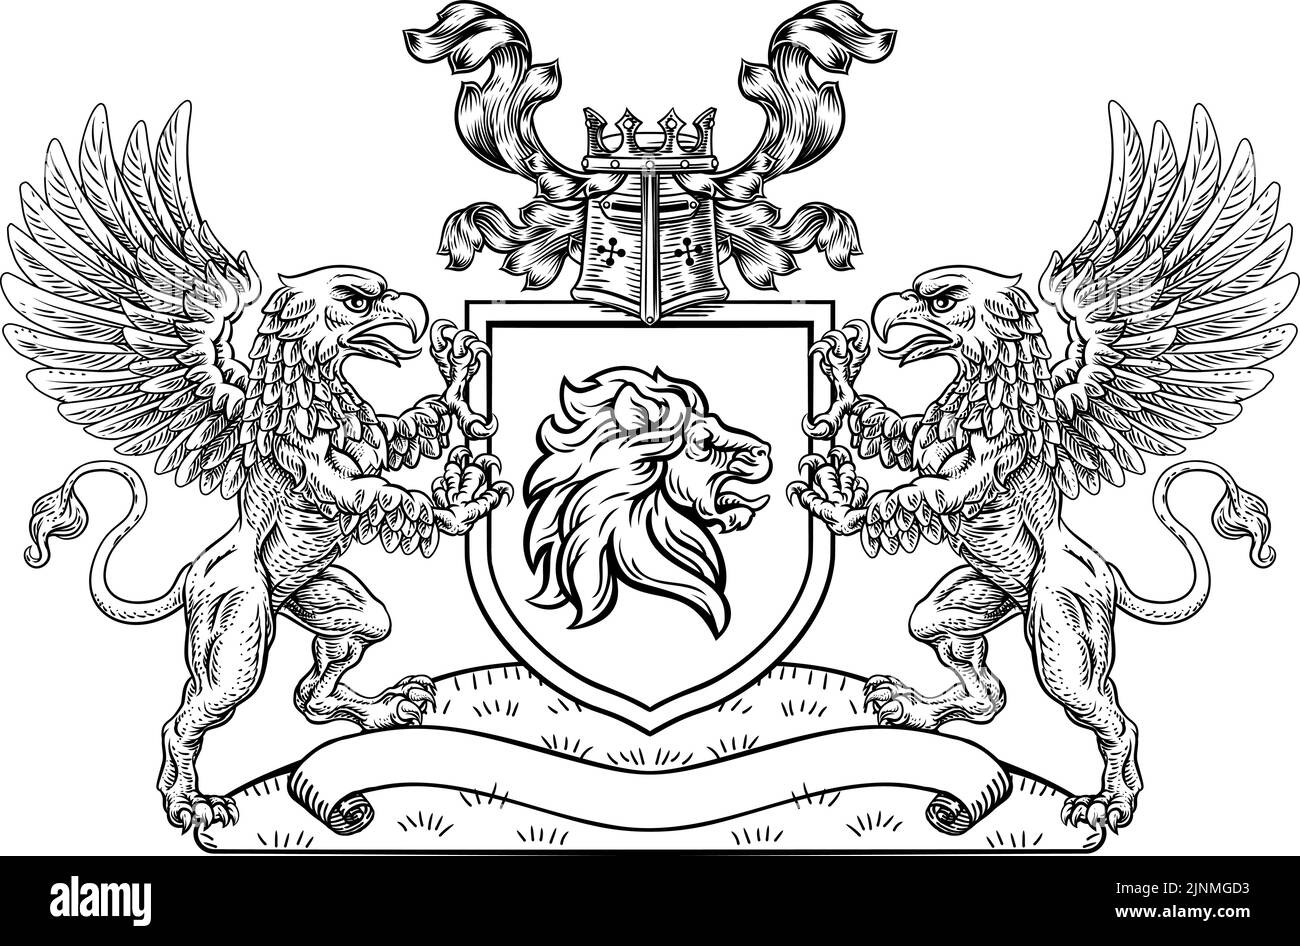 Crest Coat of Arms Lion Griffin Griffon Shield Stock Vector